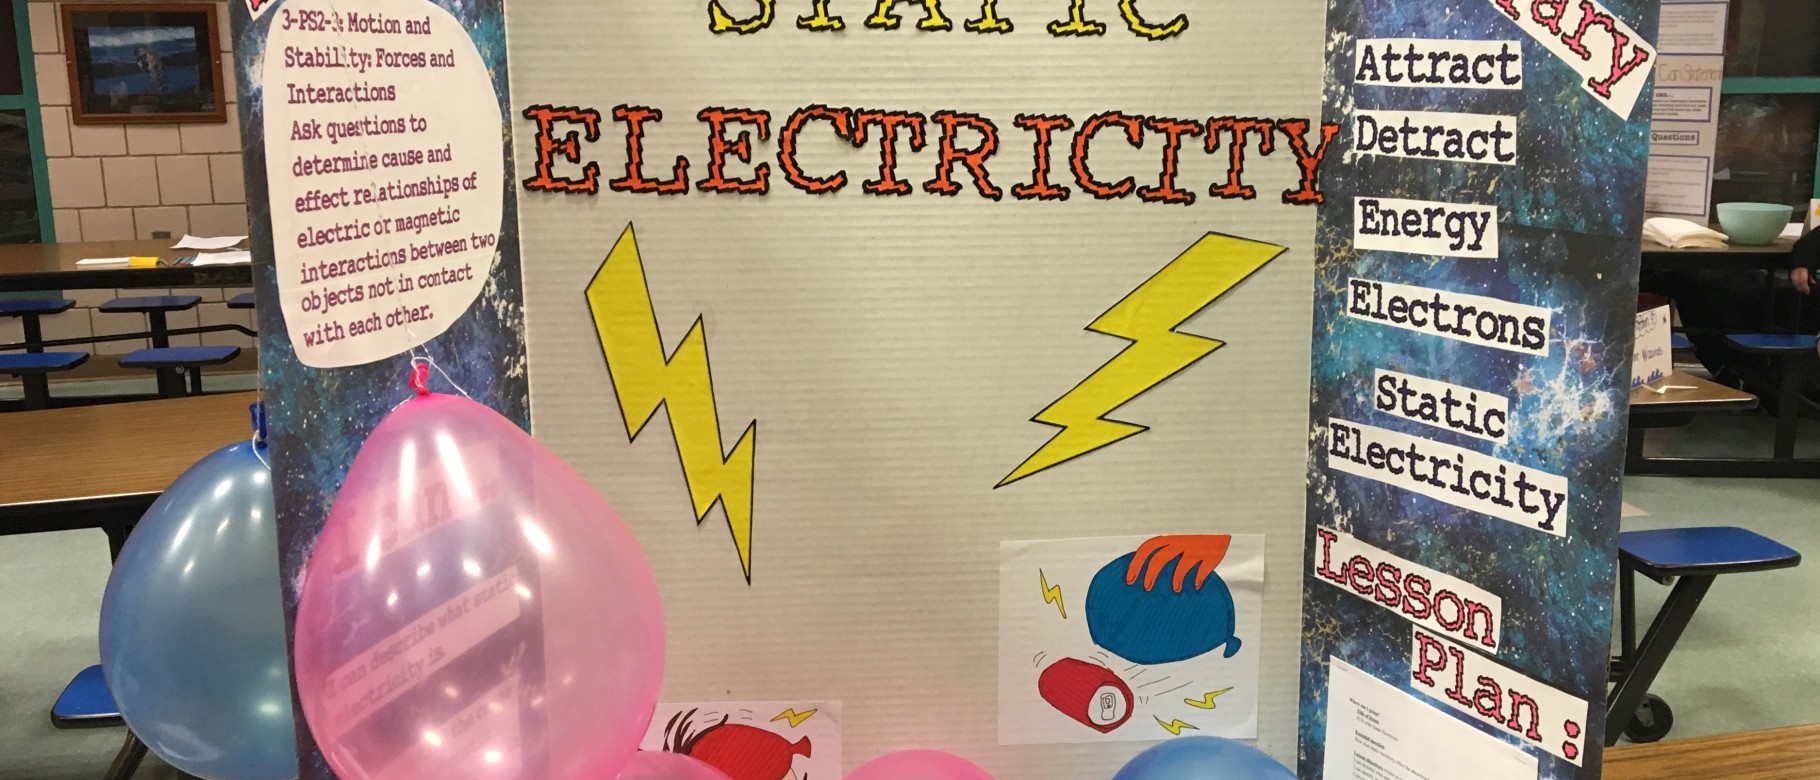 A static electricity learning station, created by UNE education students Summer McGowan and Jessica Loverdi, was one of 12 stati